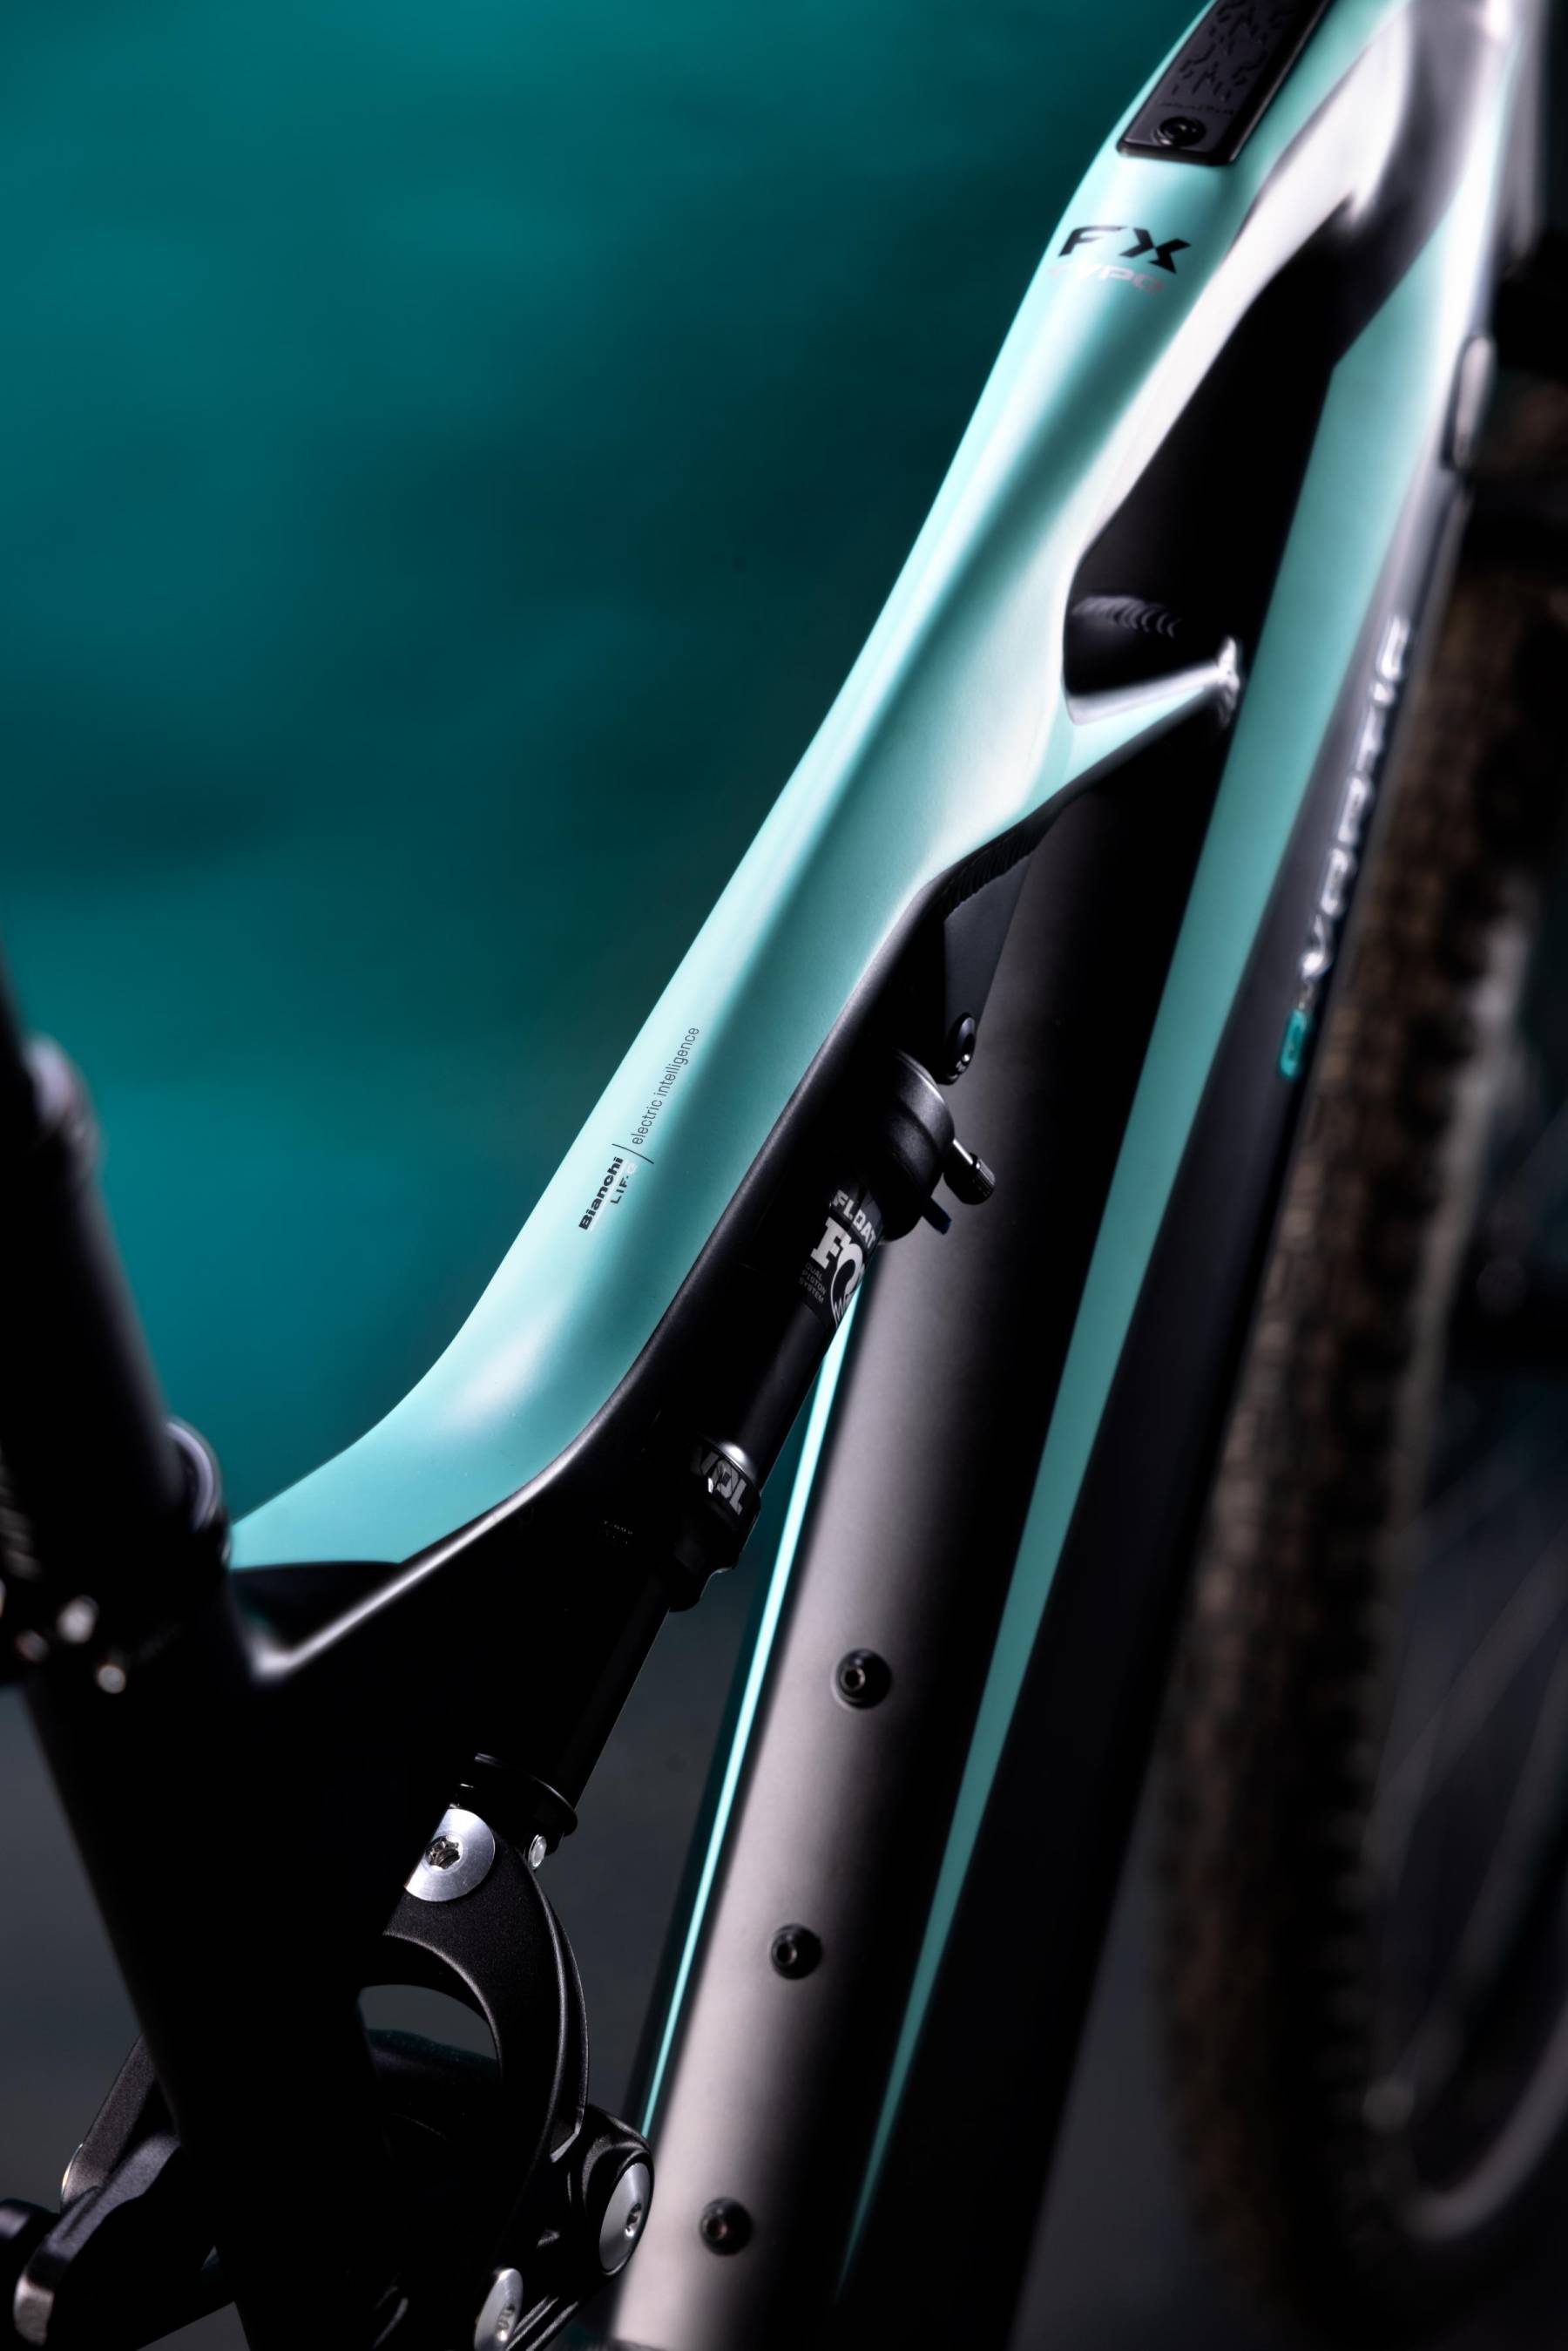 BIANCHI E-VERTIC FX TYPE 750Wh 